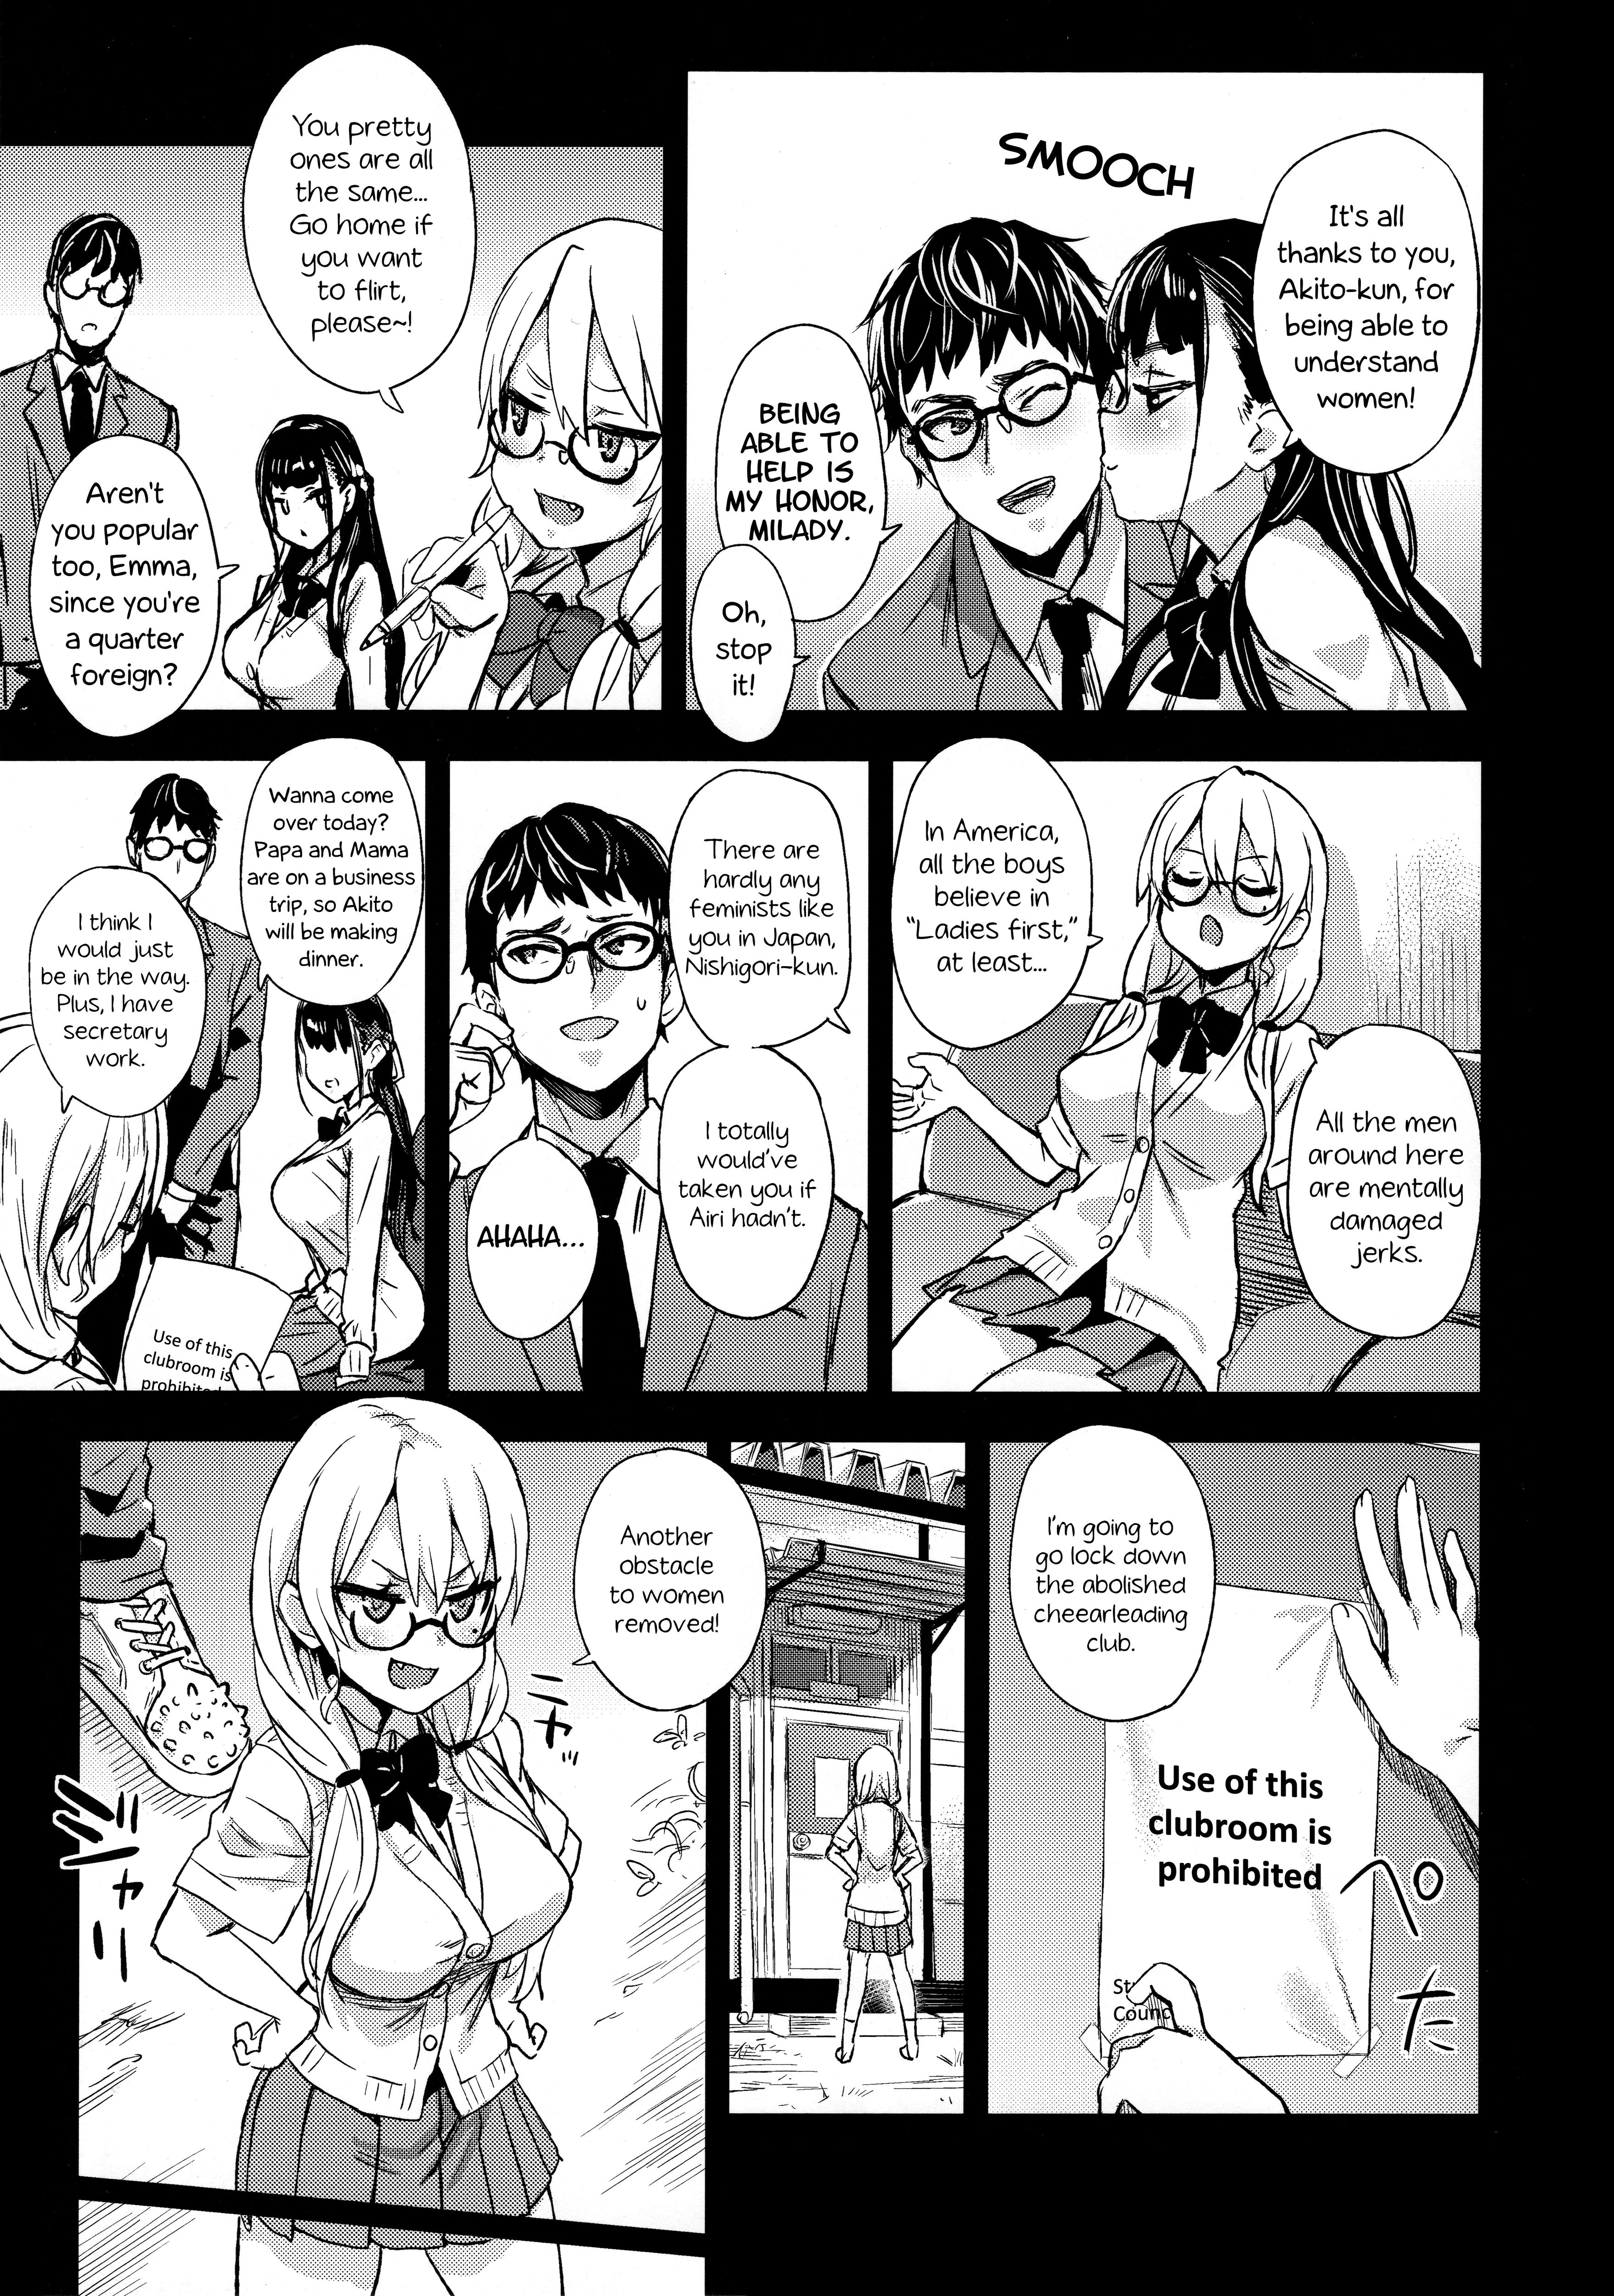 Sexy Furry Porn Secretary Glasses - Furry catgirl with glasses masturbates with her tail while schoolgirl  watches - 47 Pics | Hentai City